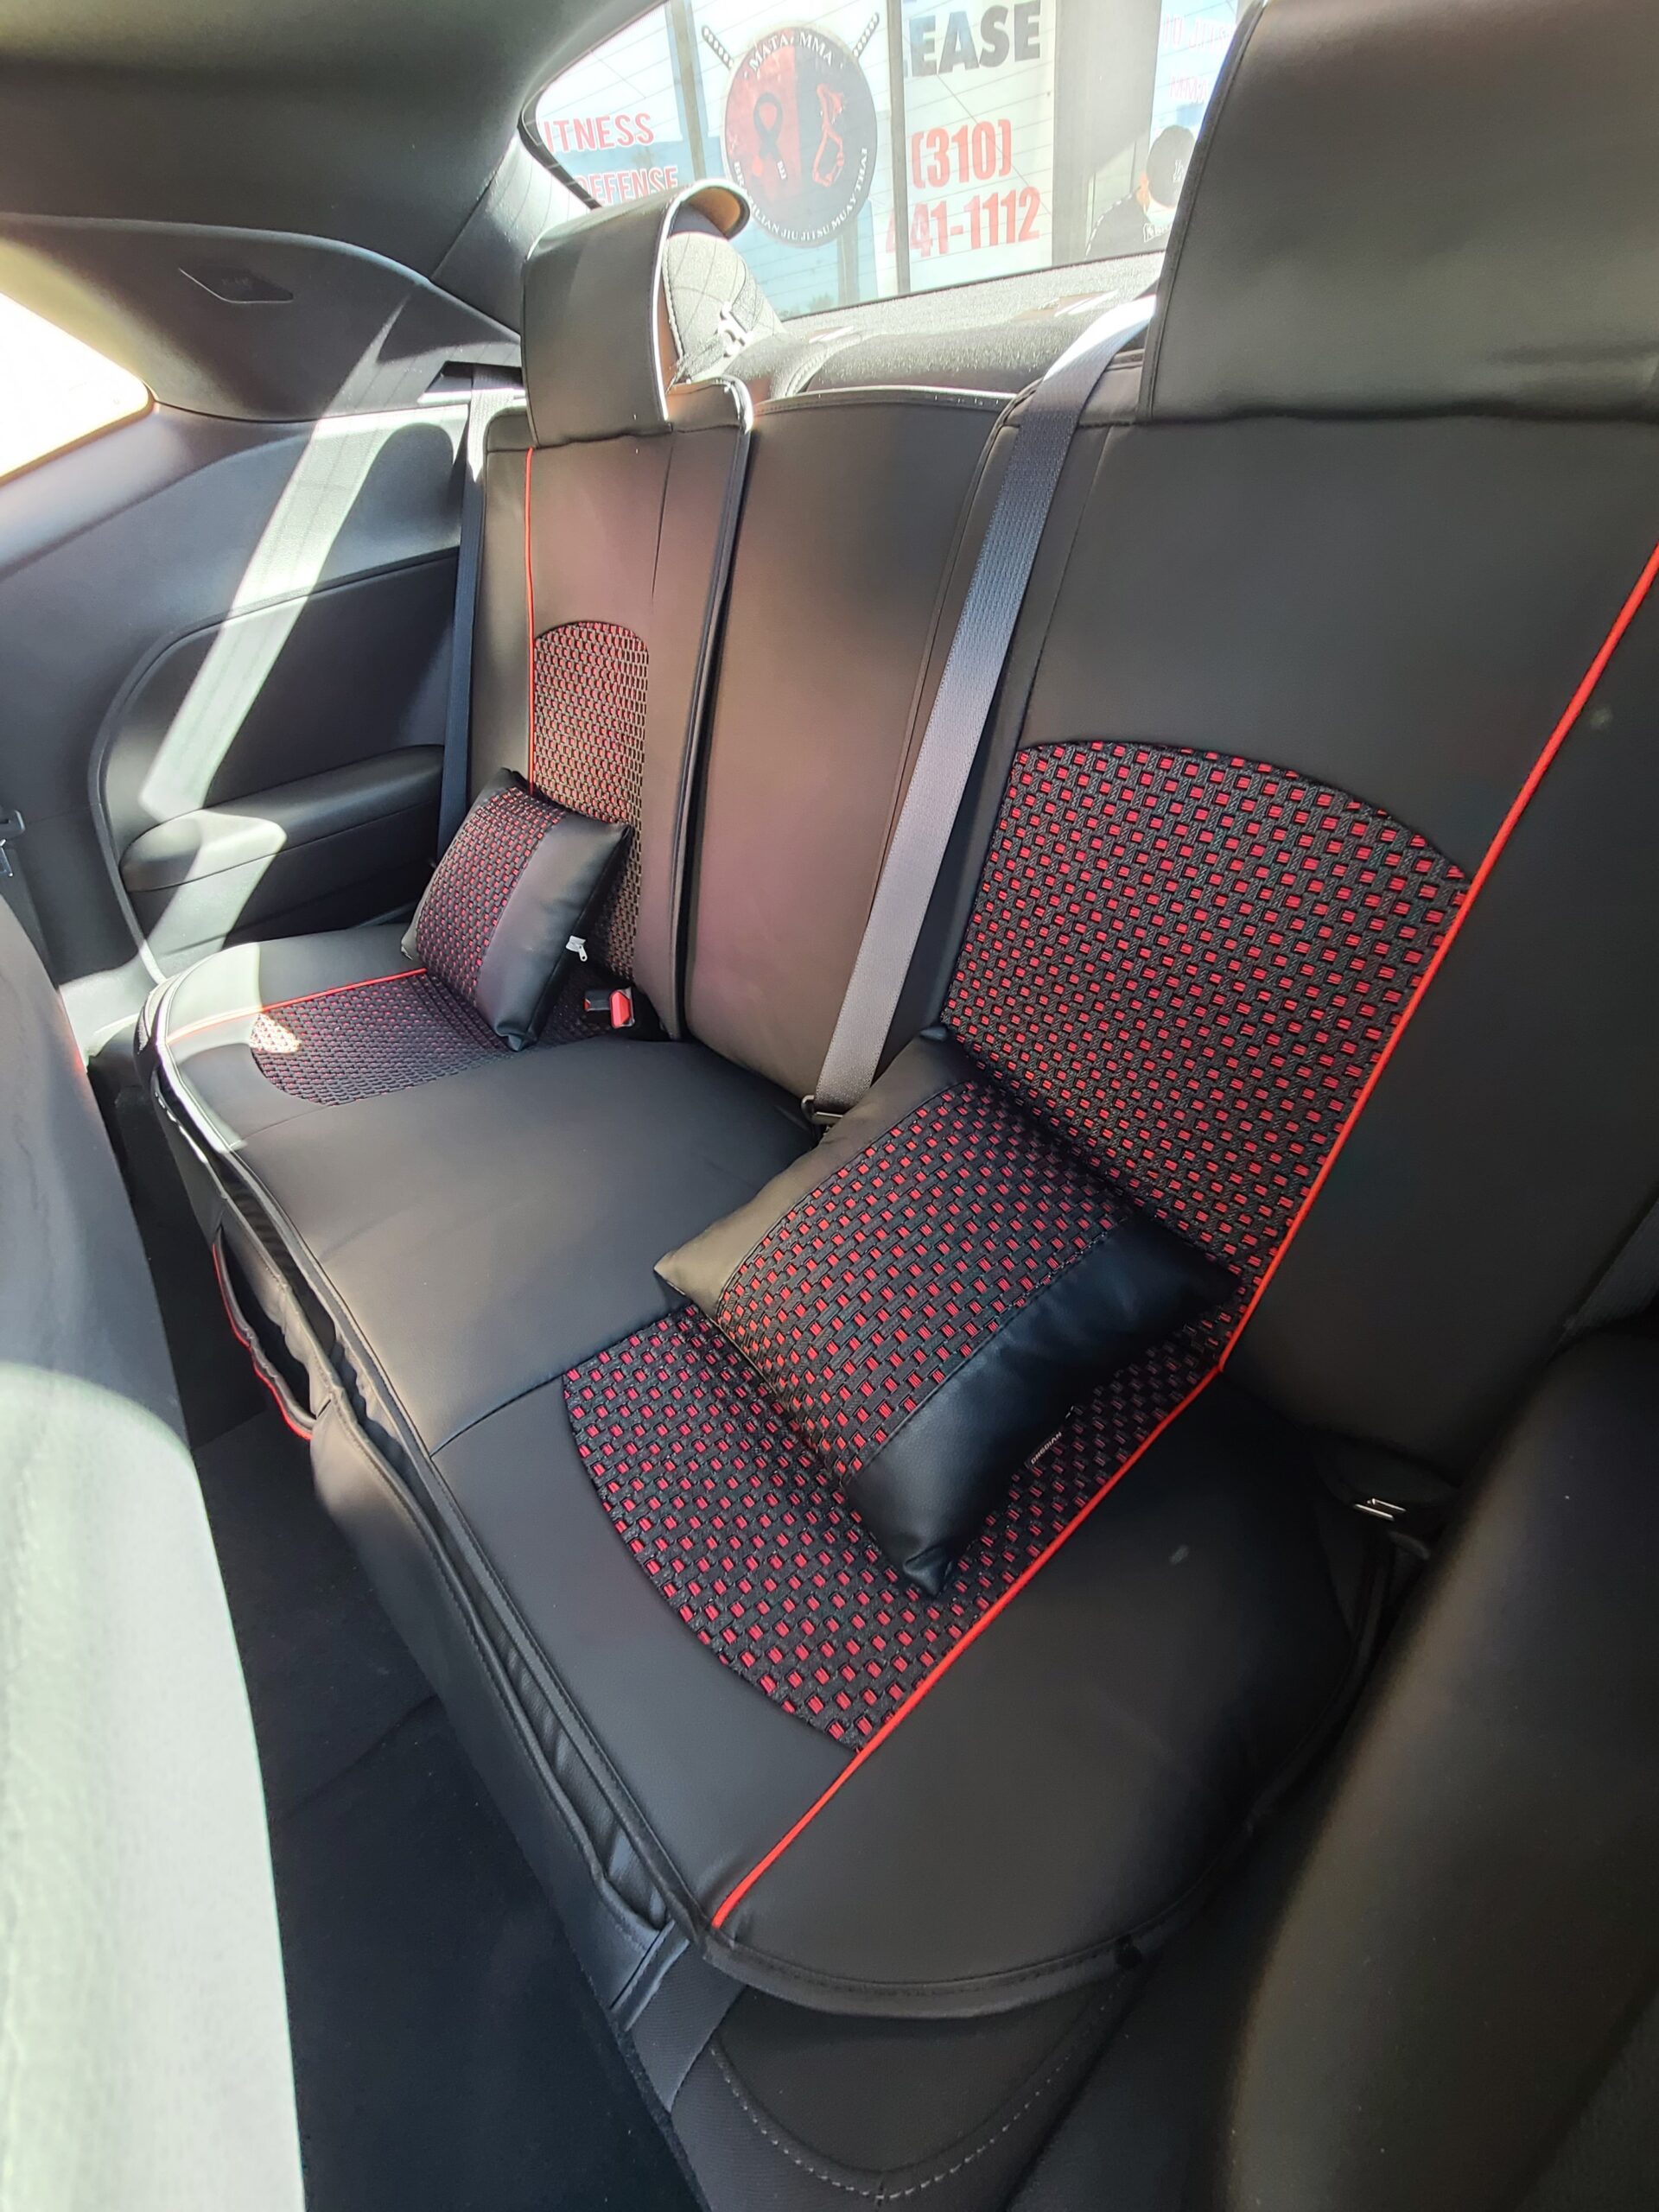 2019 Dodge Challenger Seat Cover Installed – Car Seat Cover and Custom